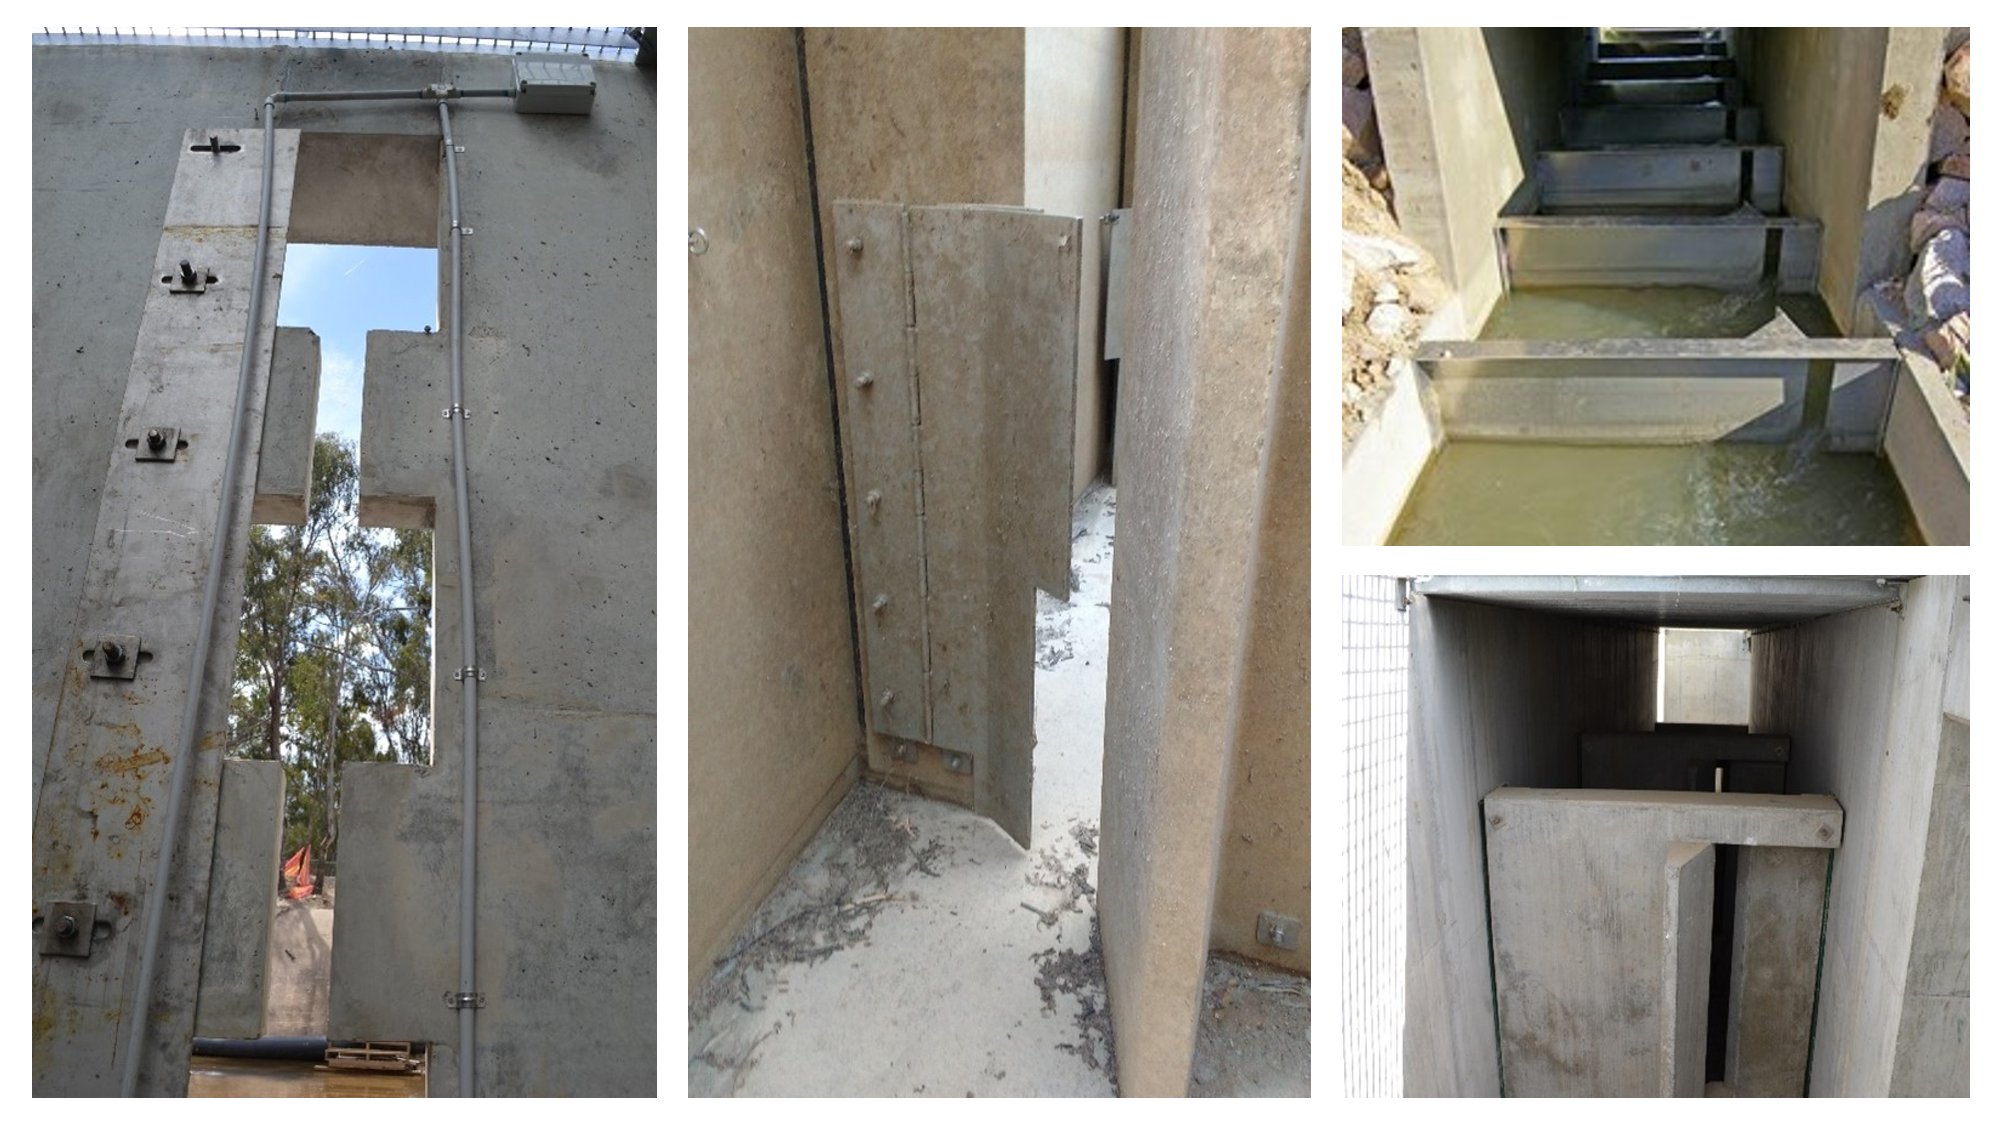 Vertical slot fishway examples: </br>
		1. Left: keyhole slot design in a vertical slot fishway, Yallakool Creek, New South Wales </br>
		2. Middle: precast concrete rectangular vertical slot baffle, showing rocky base of fishway and metal grate overhead, Yallakool Creek, New South Wales </br>
		3. Top-right: vertical slot fishway, showing rectangular slot design, Sheepstation Creek, Ayr, Queensland </br>
		4. Bottom-right: metal keyhole slot design in vertical slot fishway baffle, Chowilla Regulator, South Australia
		Photo by Ivor Stuart (1,2 and 4), and Tim Marsden (3)
	